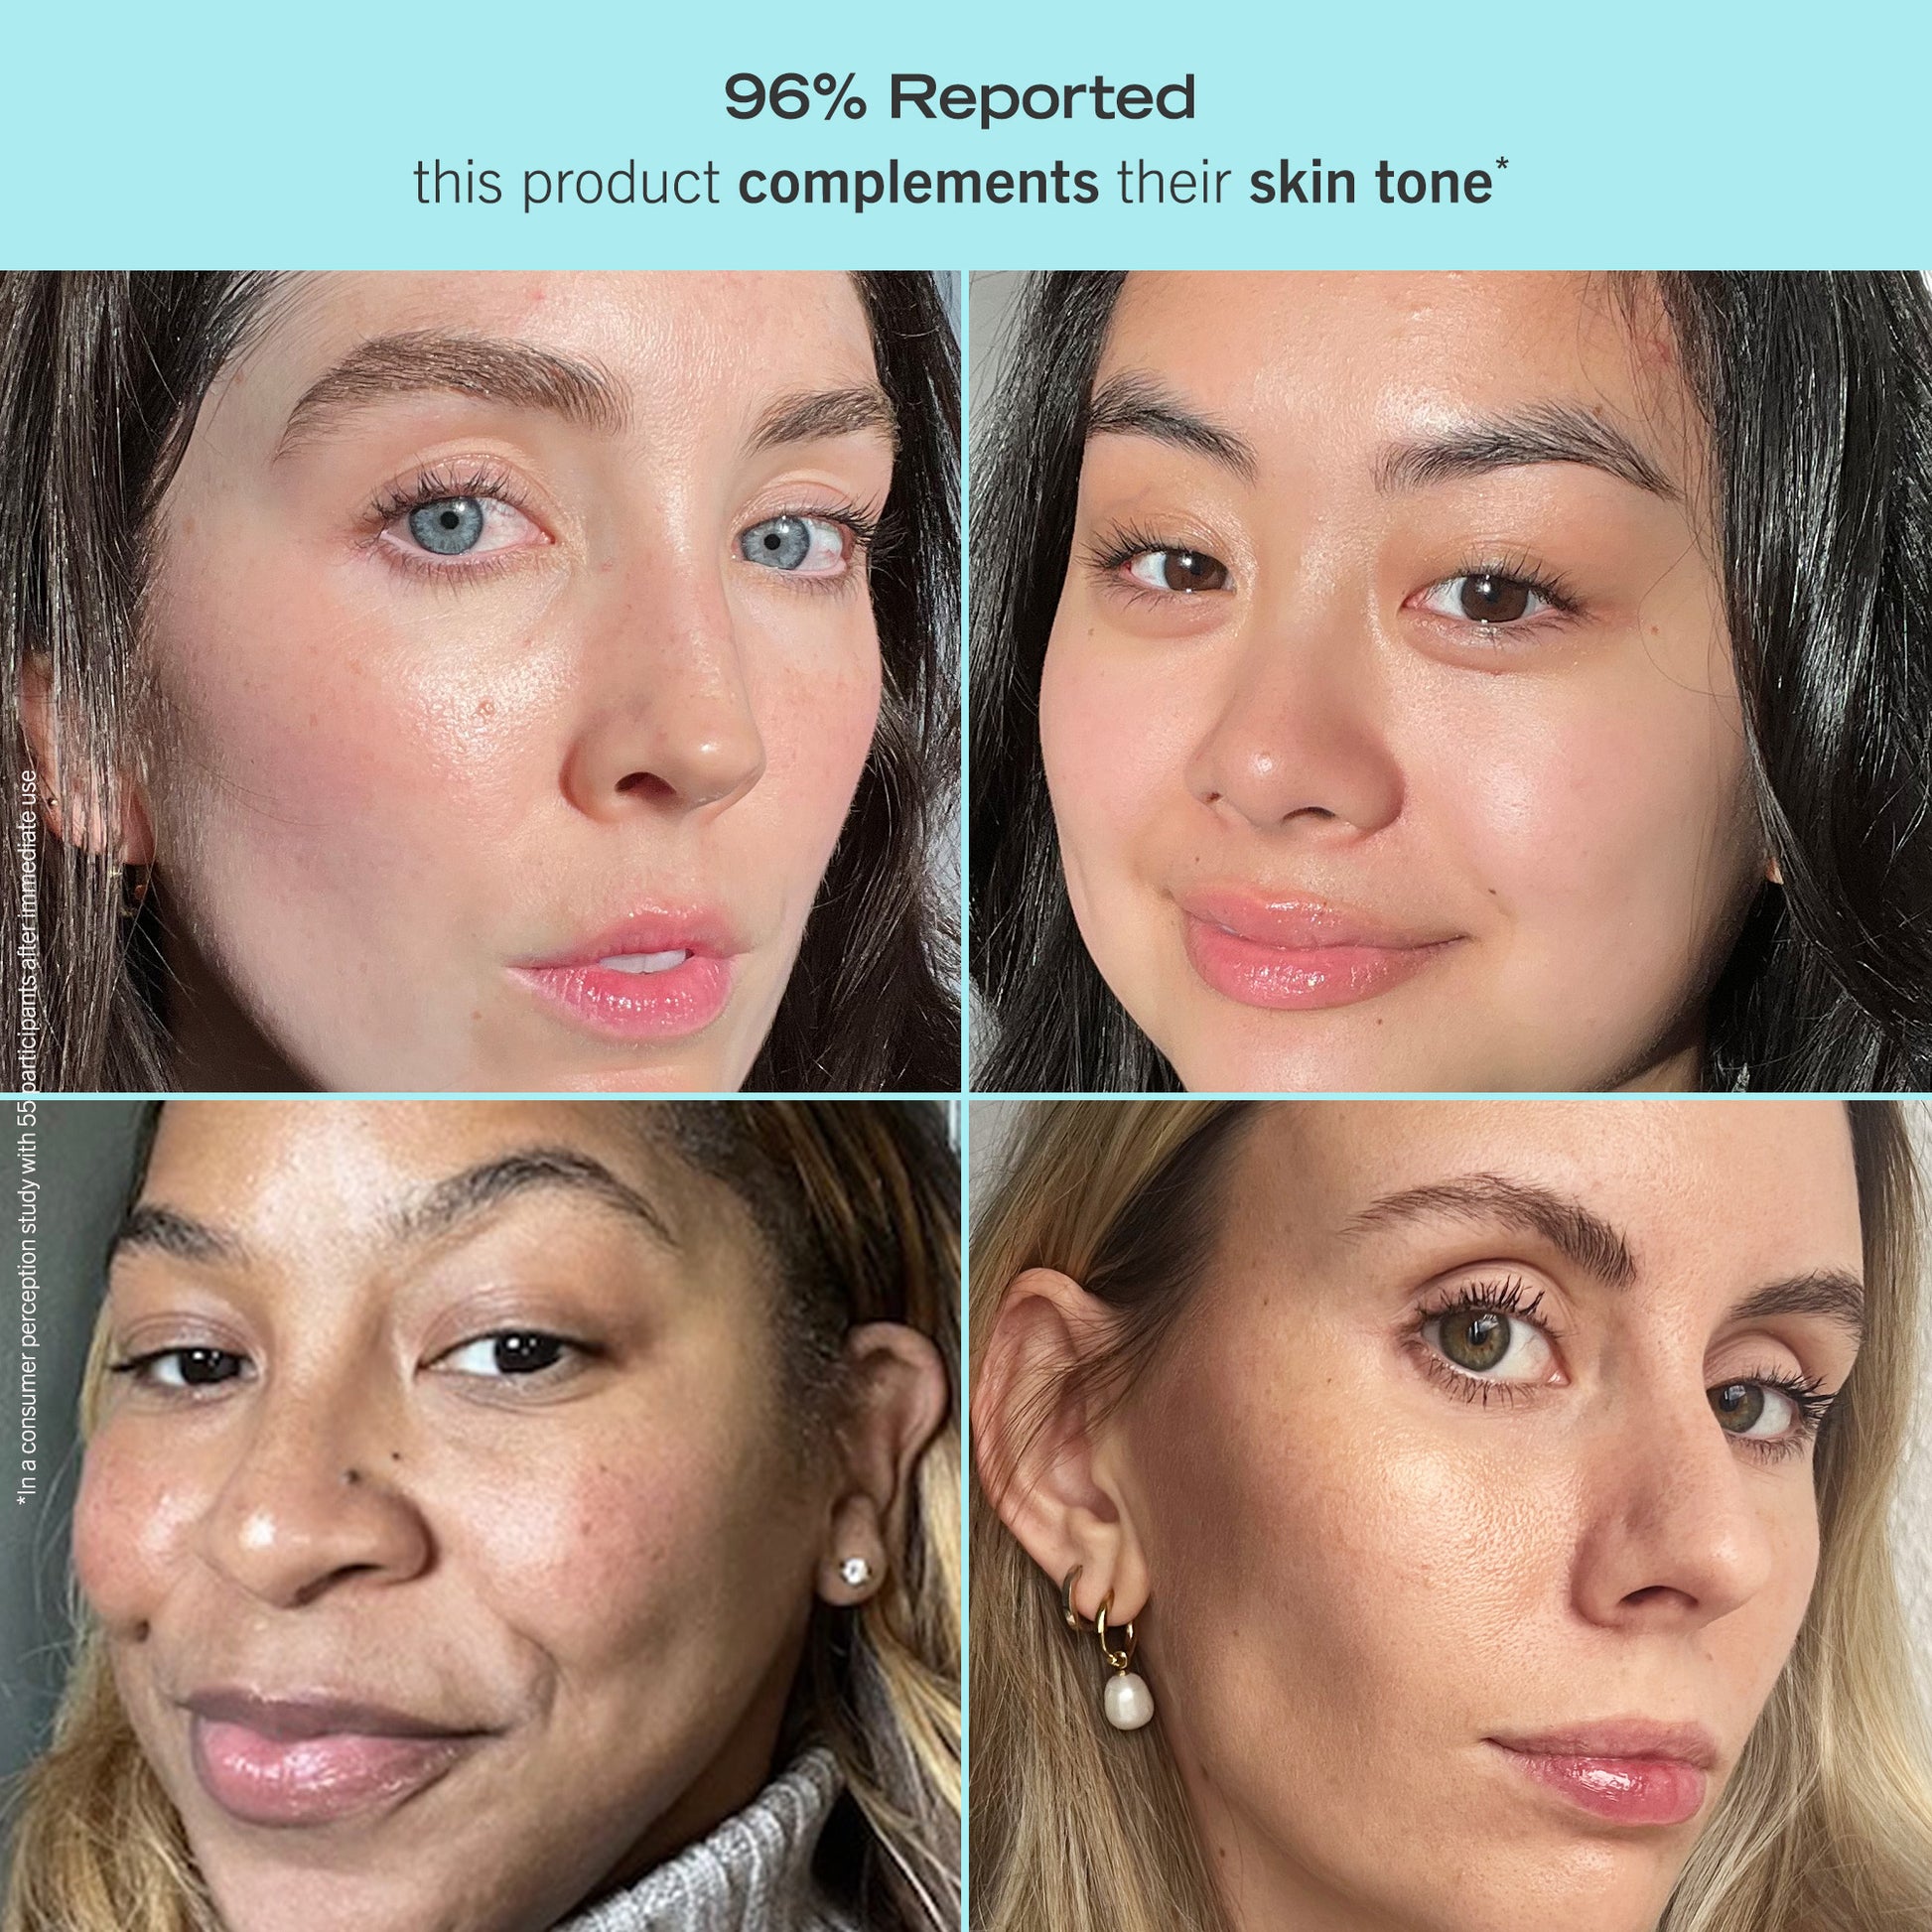 Four models. 96% Reported that this product complements their skin tone